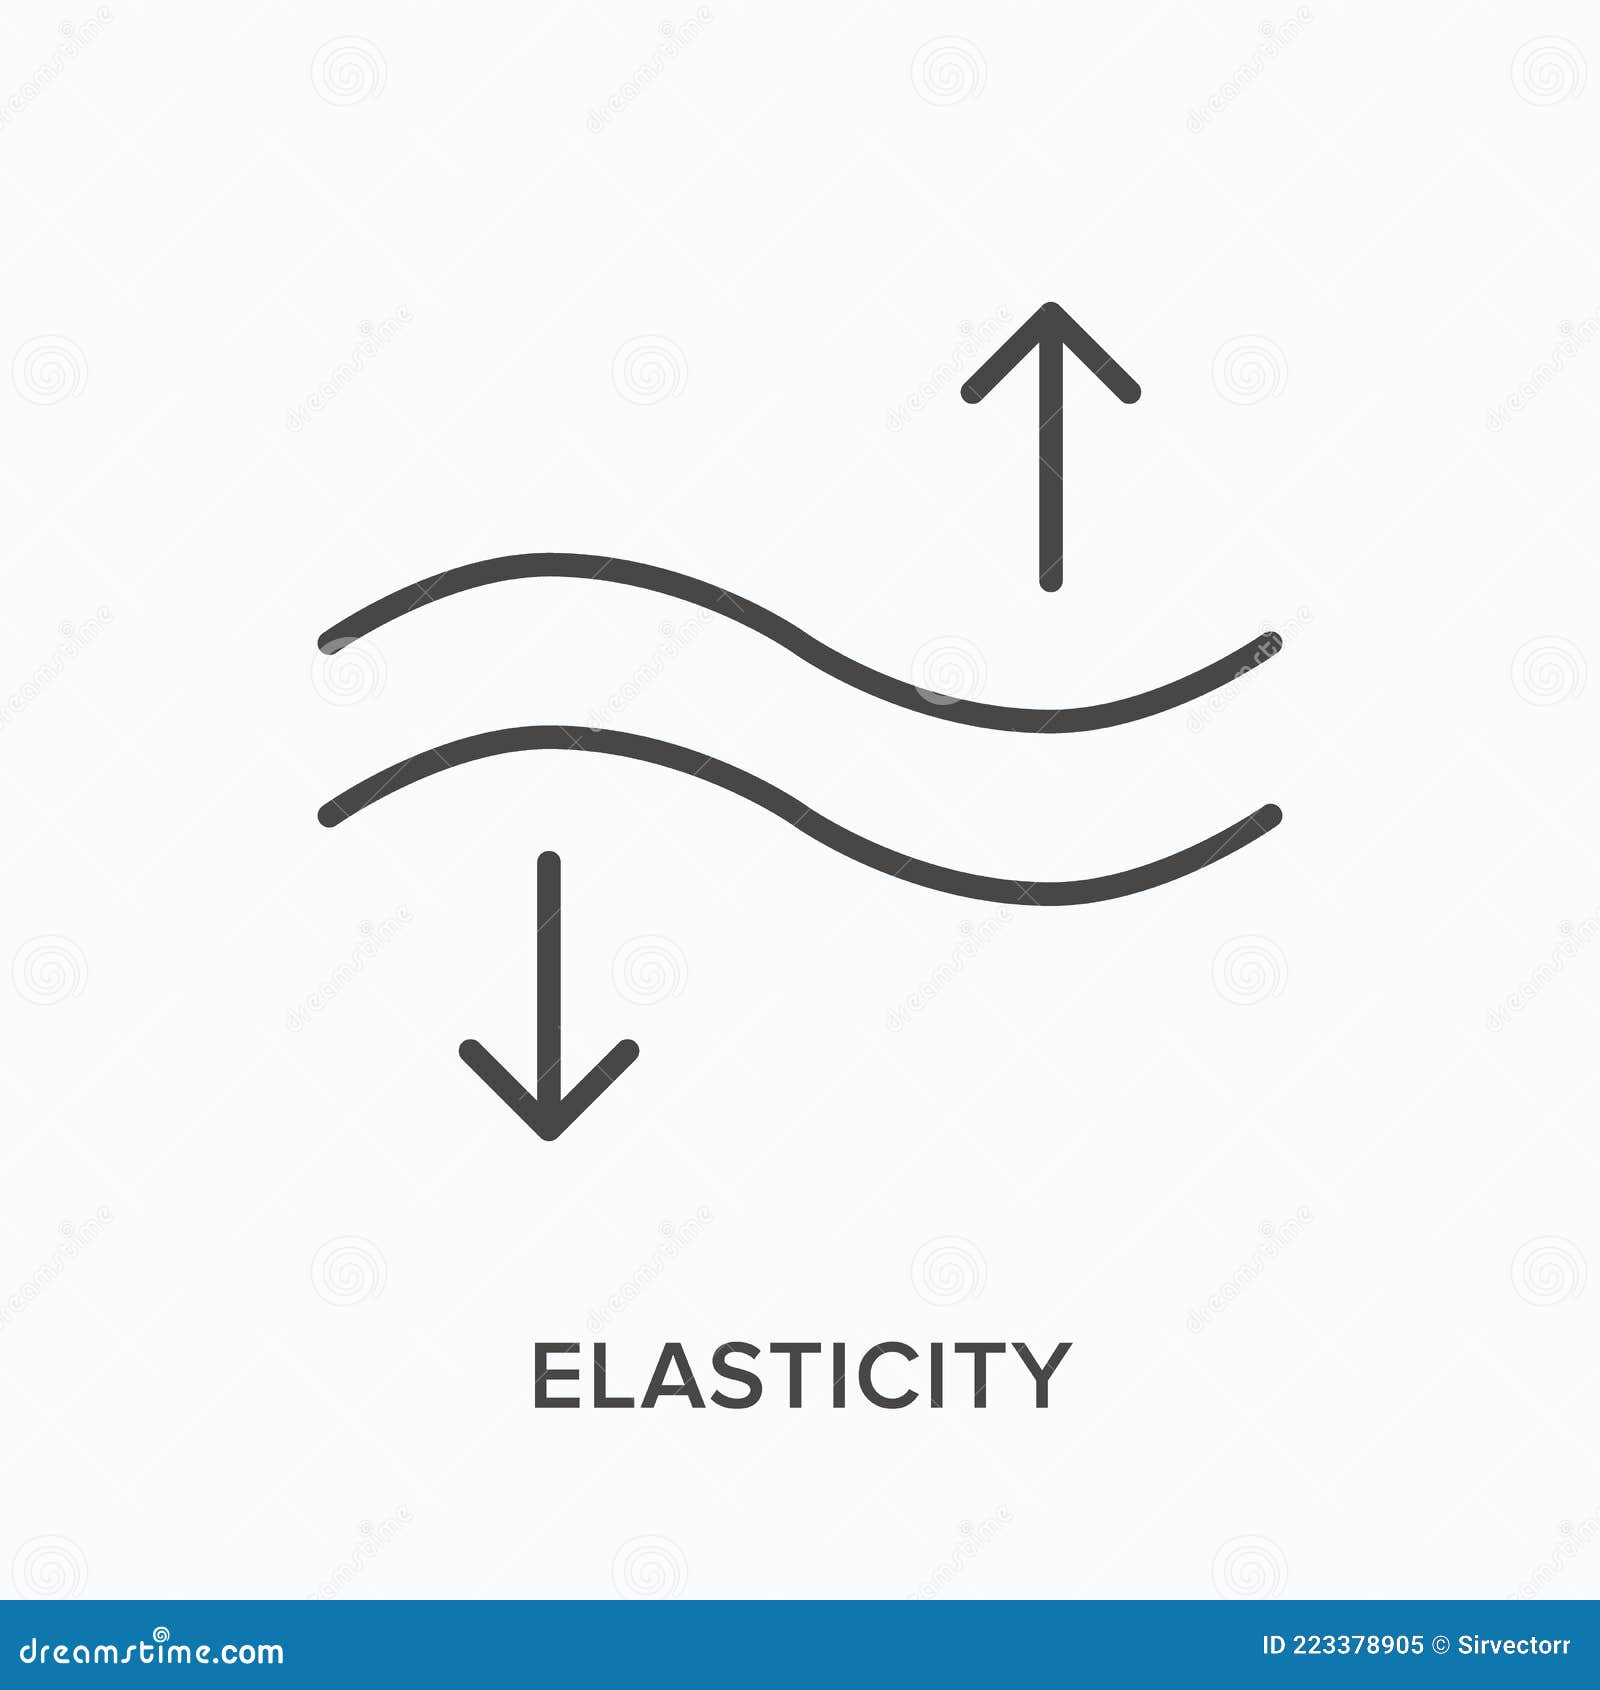 elasticity flat line icon.  outline  of flexible surface. black thin linear pictogram for flexibility